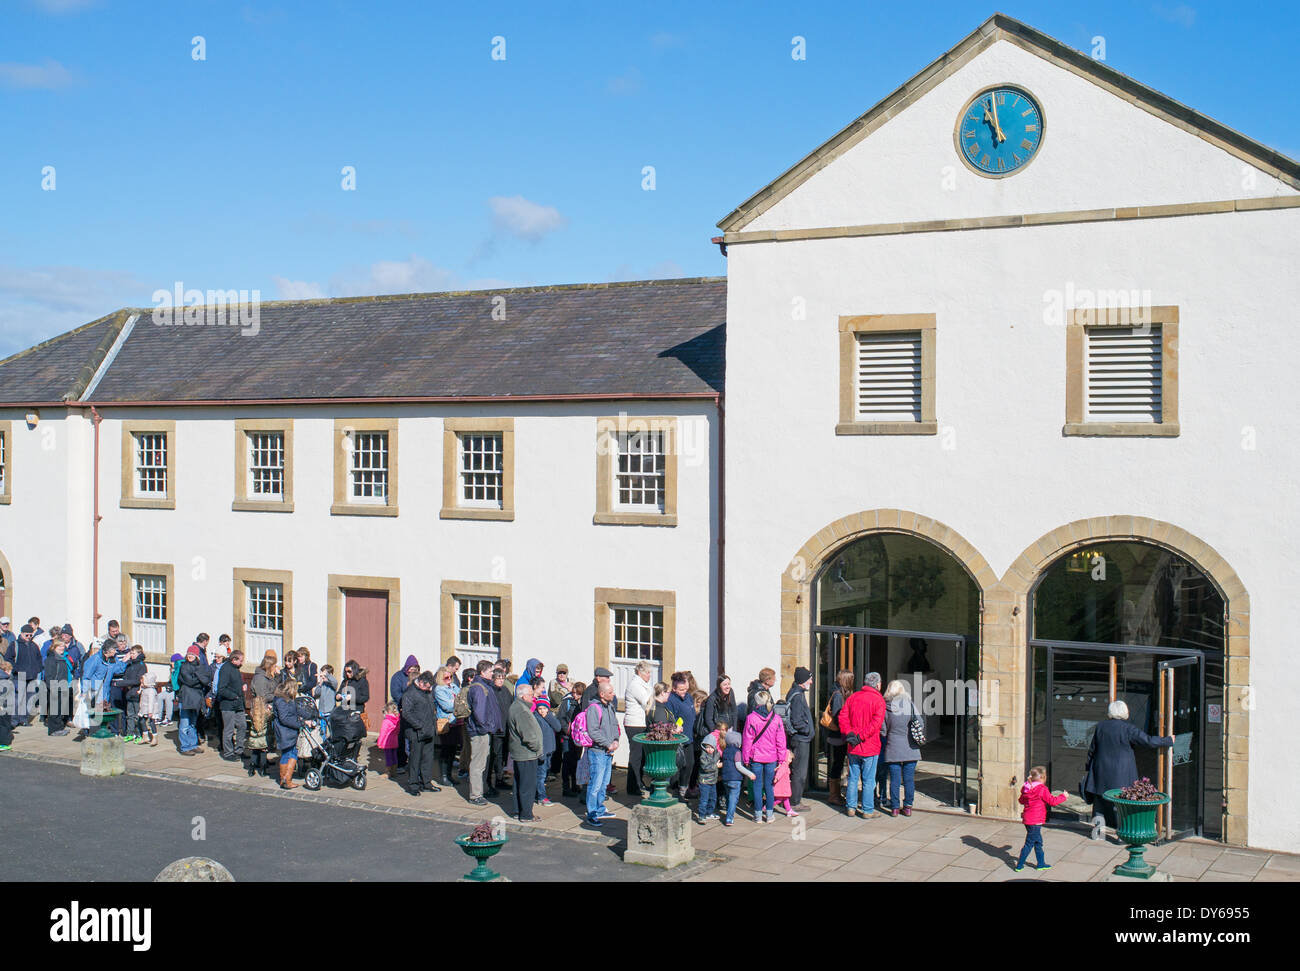 Beamish, Co. Durham, UK. 8th April 2014. People queuing in April sunshine to enter the North of England Open Air museum at Beamish. (c) Washington Imaging/Alamy Live News Stock Photo